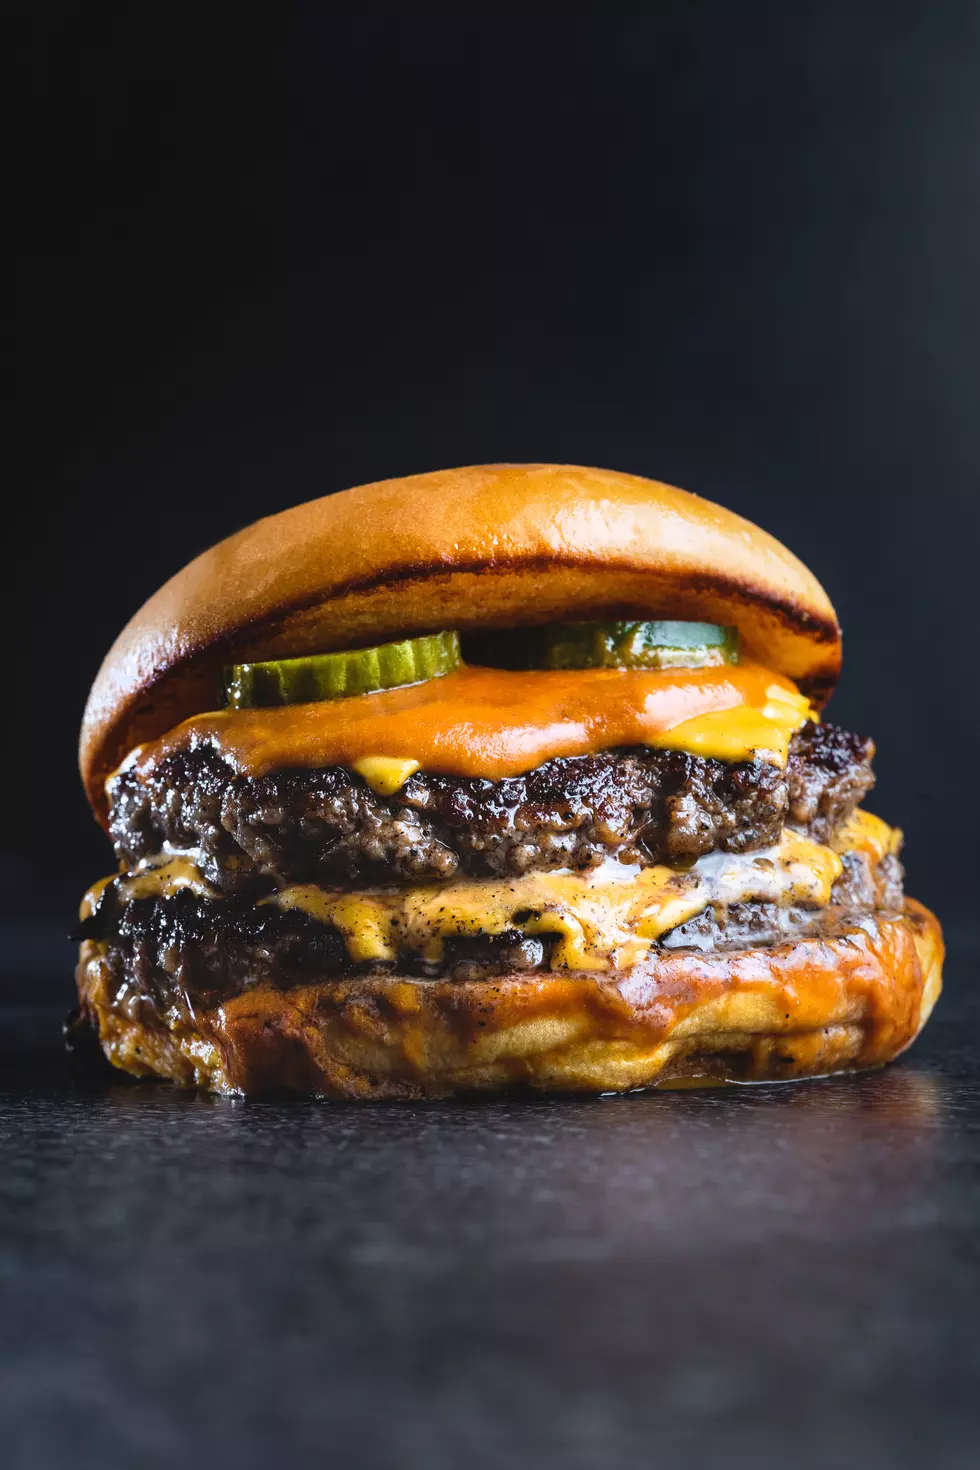 TripAdvisor's Best Burgers In Montana. Do You See Your Favorite?